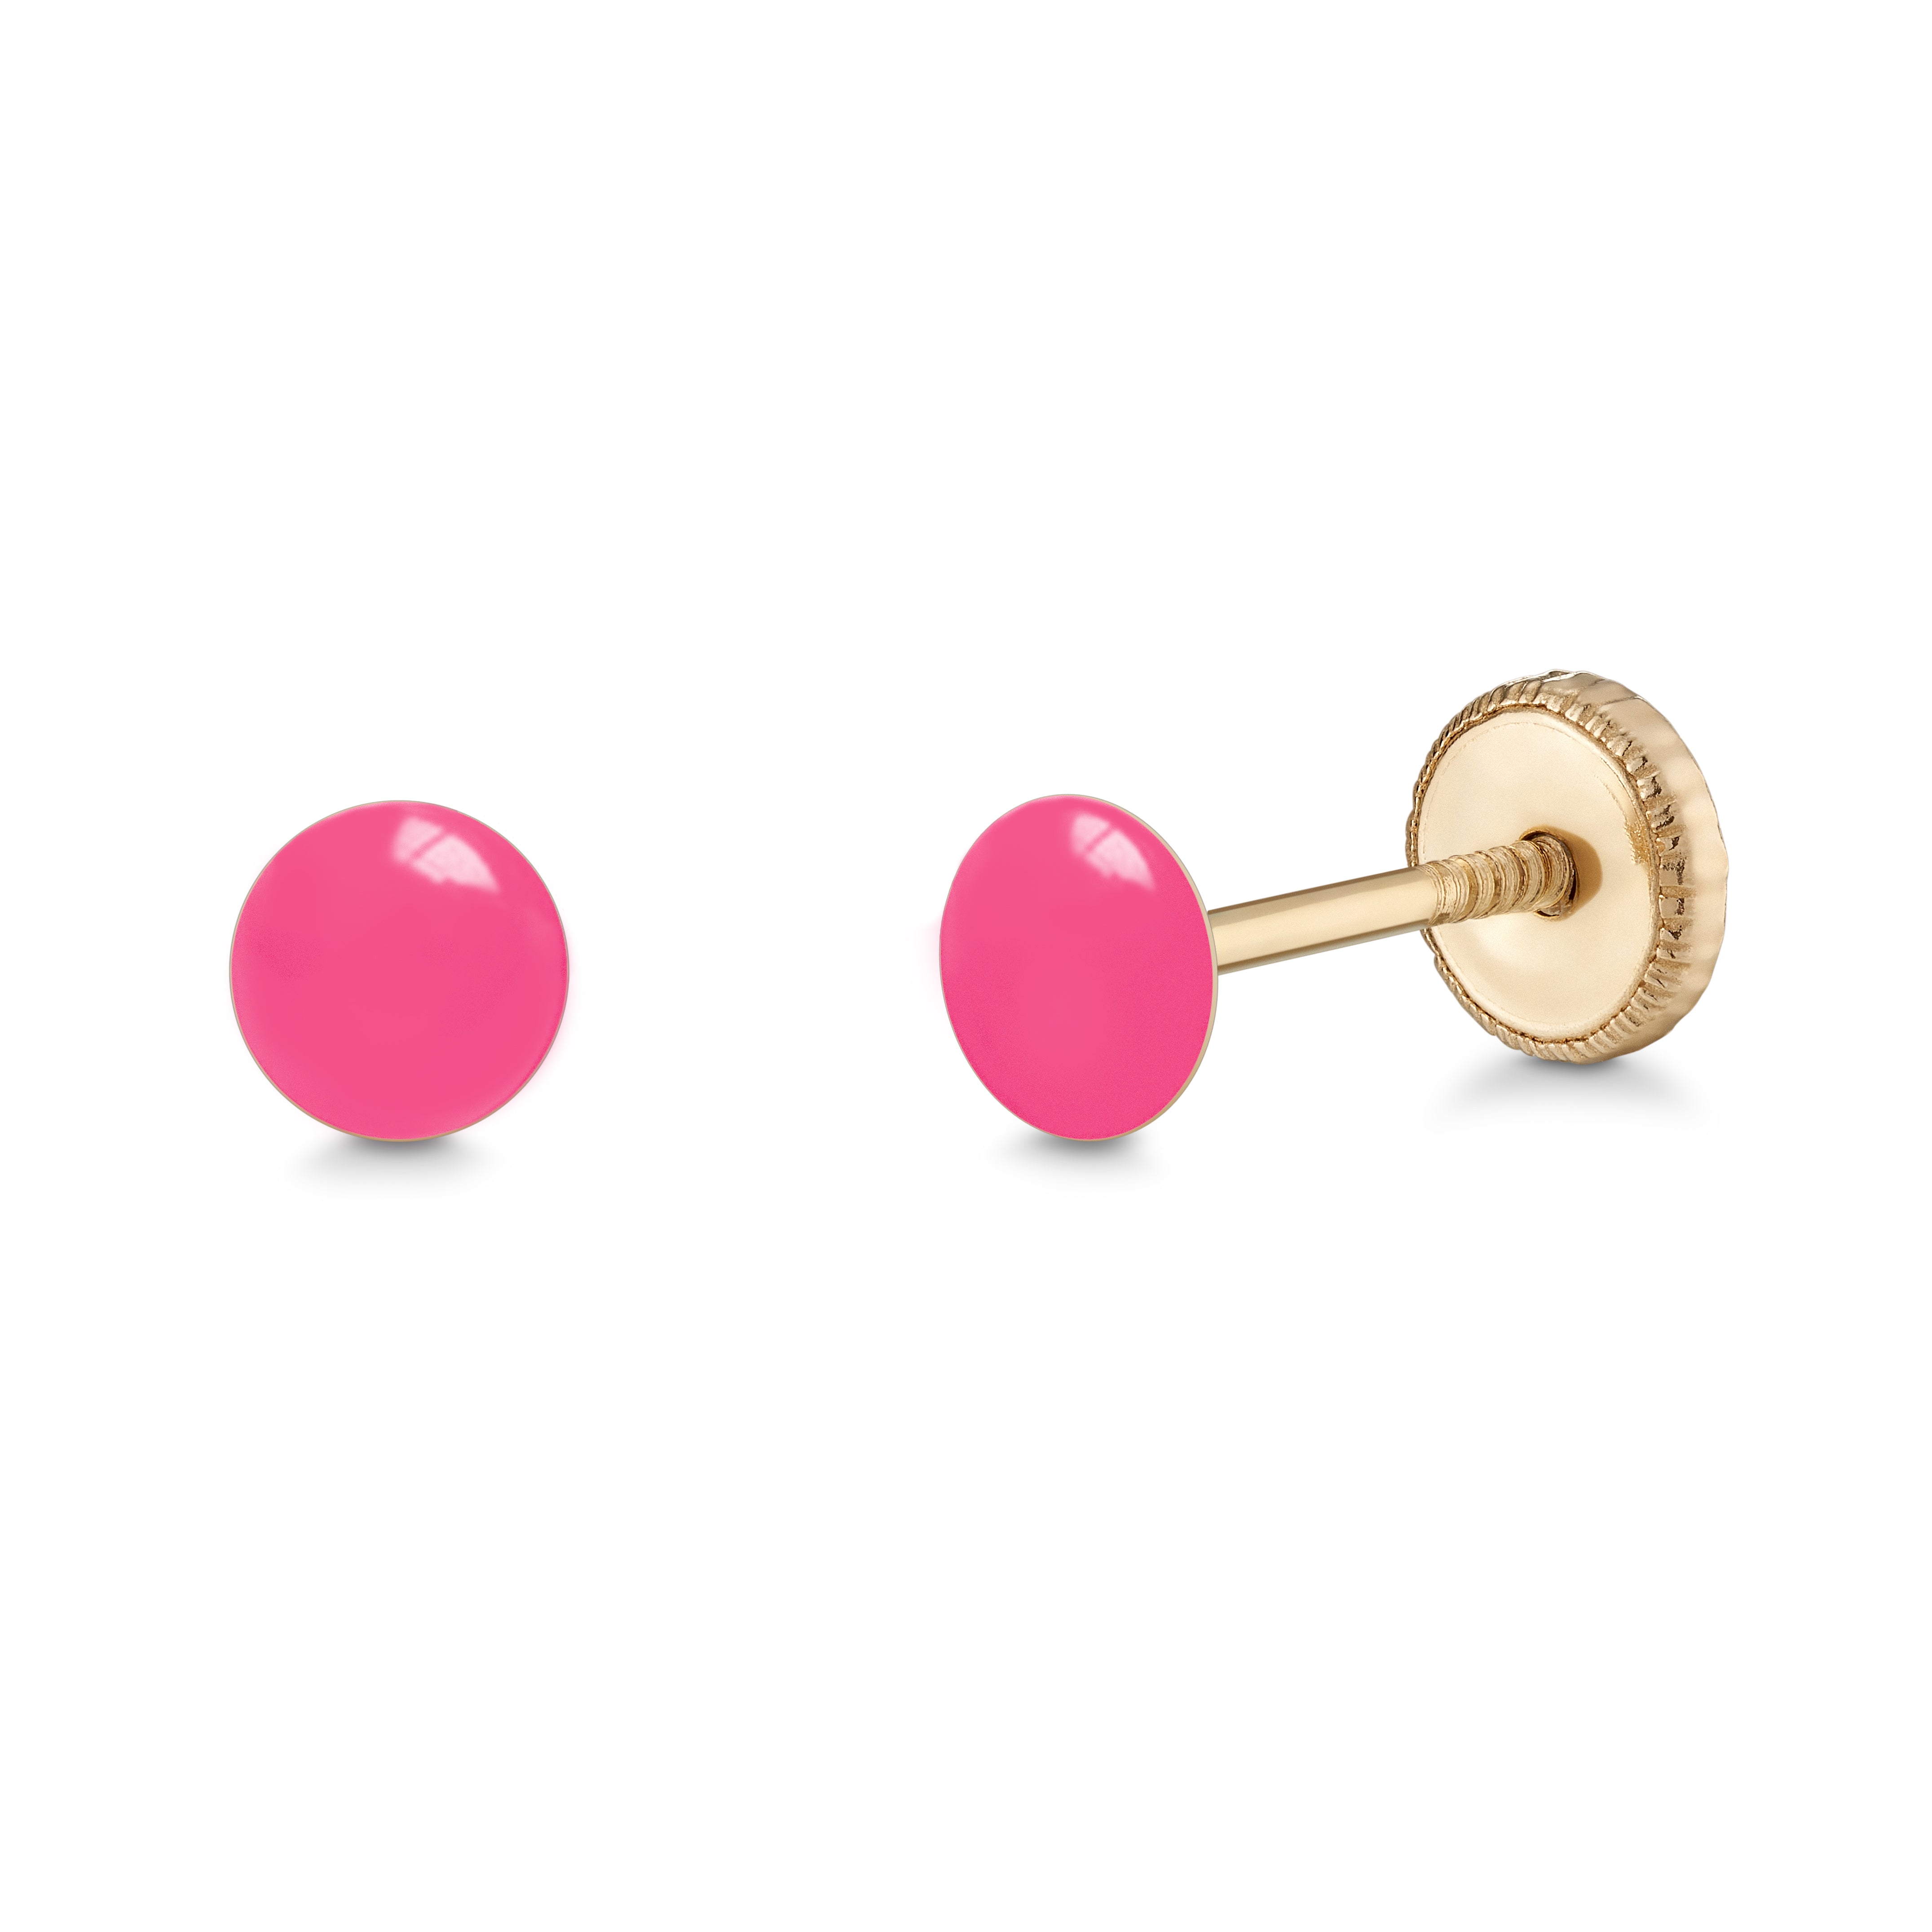 UNICORNJ 14k Yellow Gold Stud Earrings Round Button Dot with Color Enamel for Baby Girls or Women Multiple Piercings Screwback 4mm